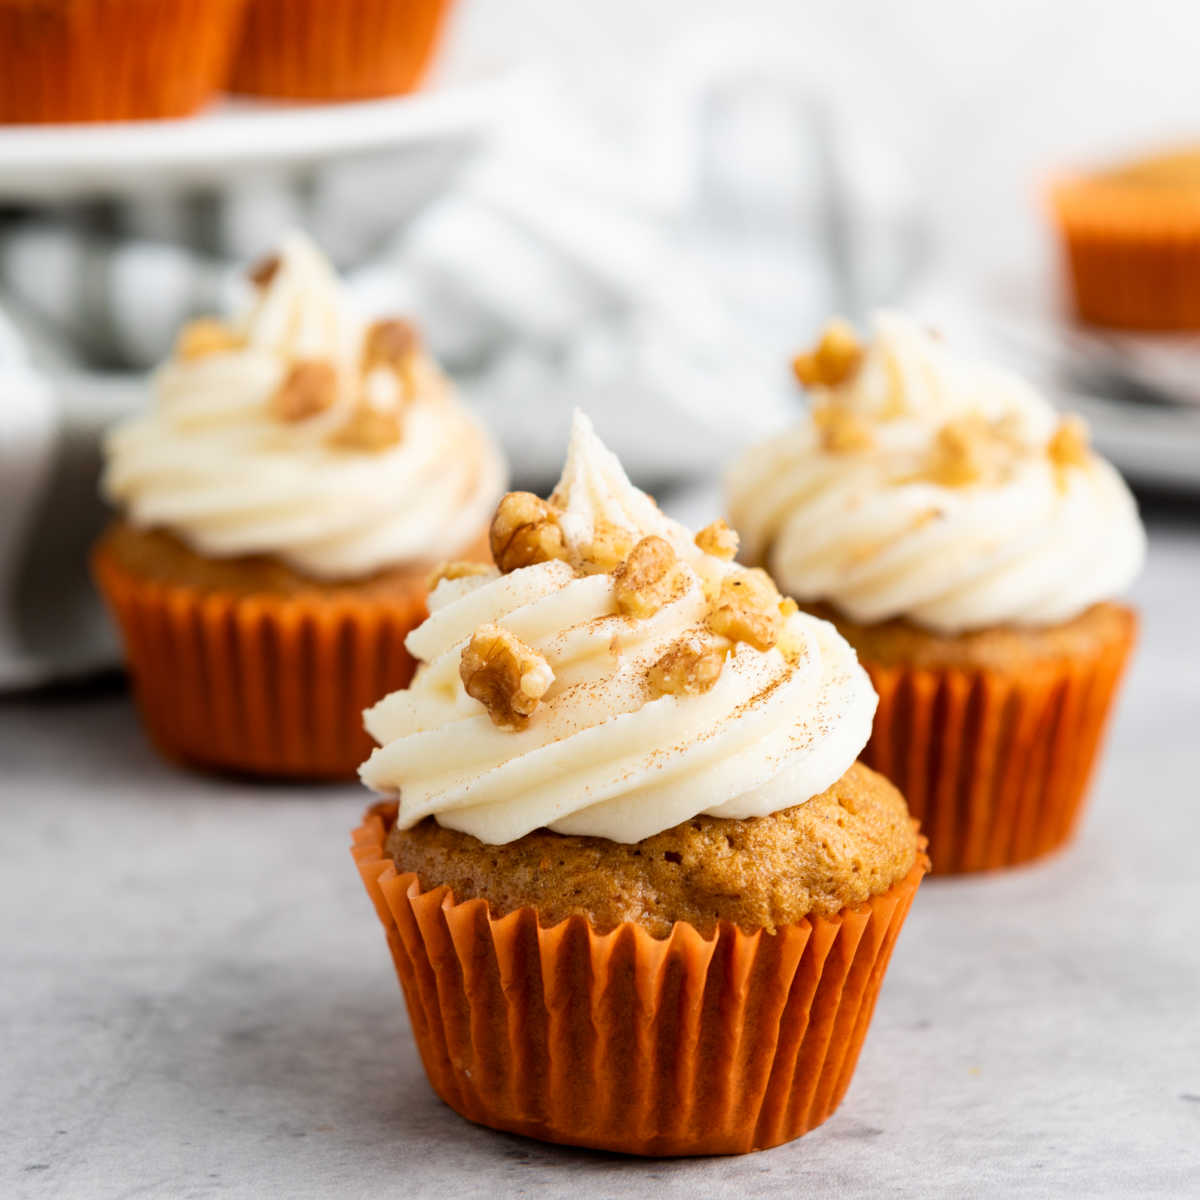 Carrot cake cupcakes in orange paper liners and topped with piped frosting and chopped walnuts.